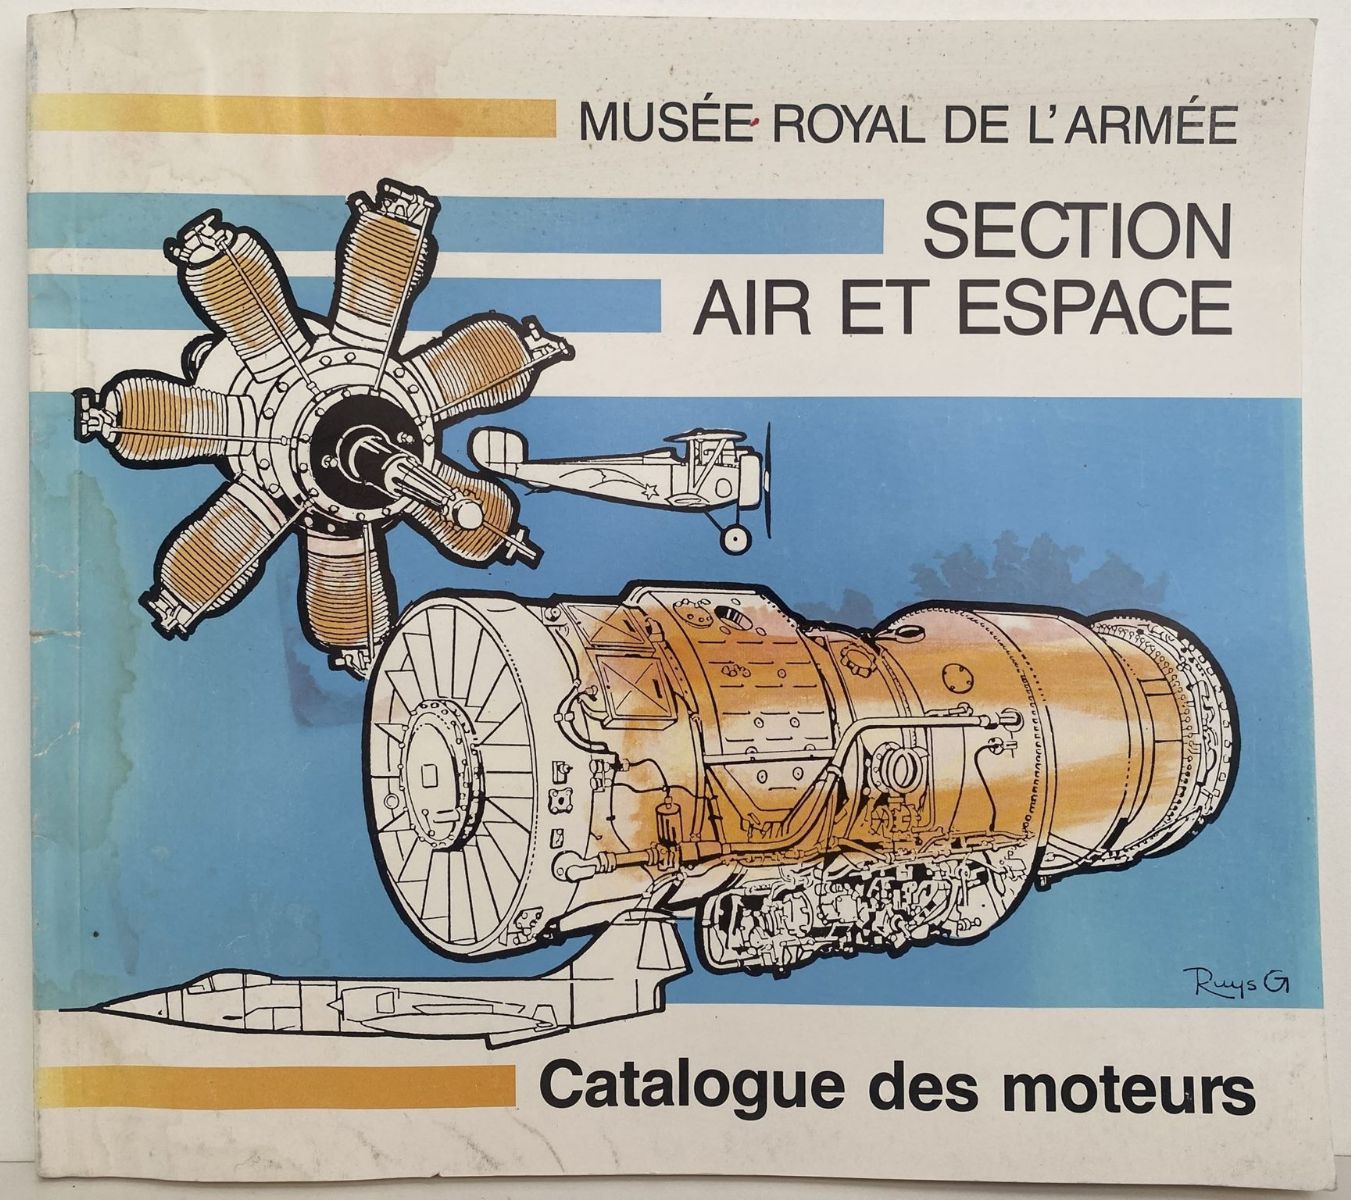 SECTION AIR ET ESPACE - Book on Aircraft Engines